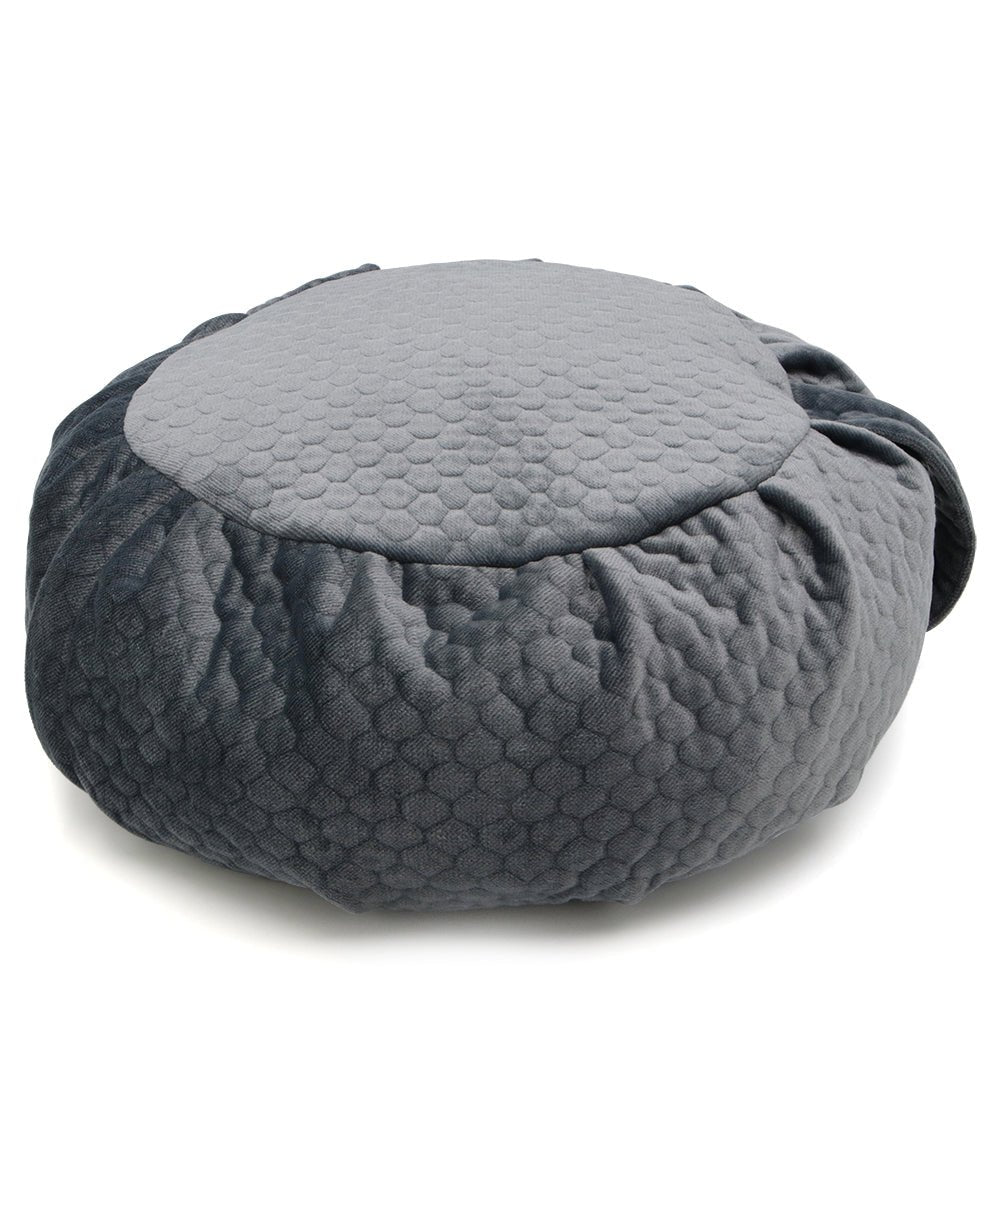 Luxe Quilted Zafu Meditation Cushion in Honeycomb – Buddha Groove